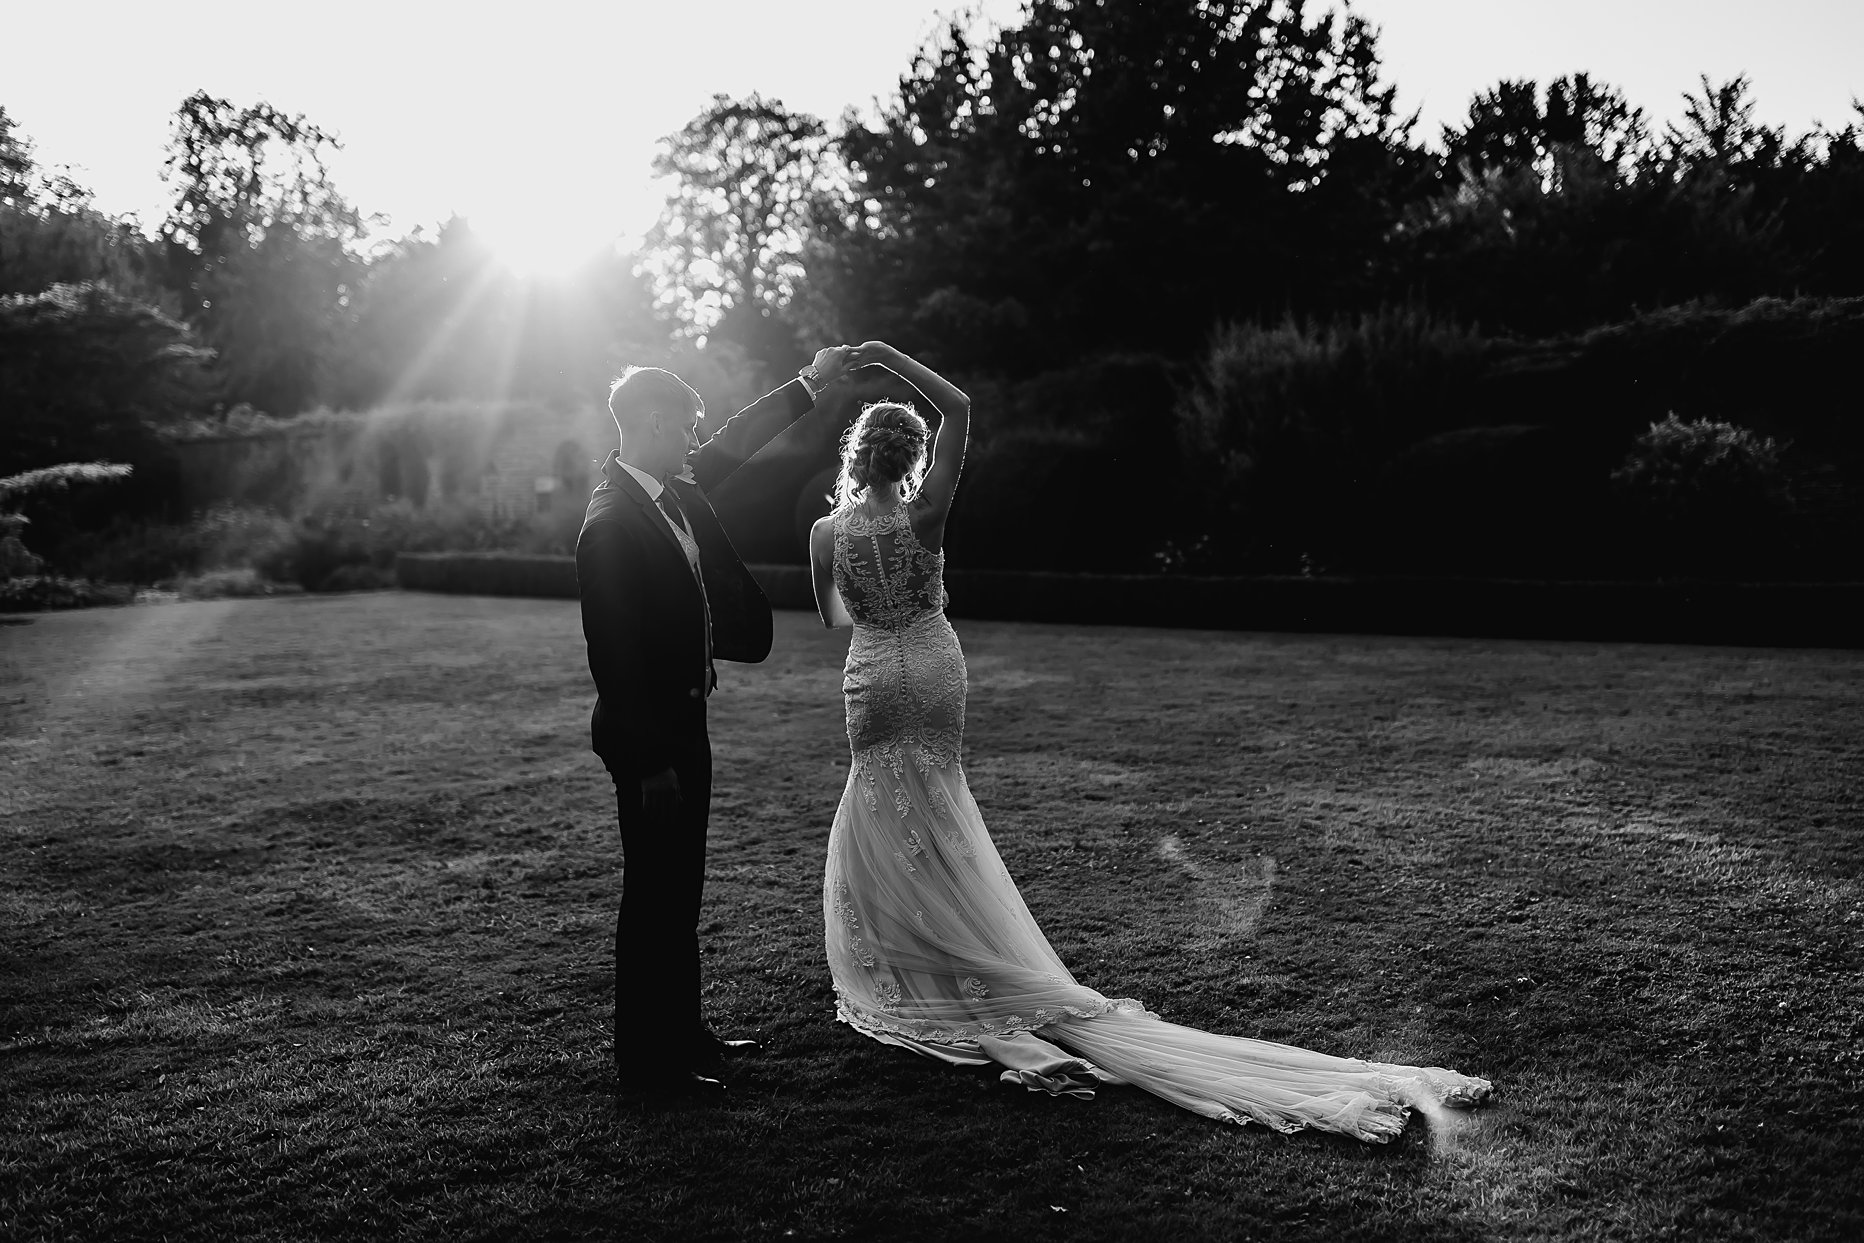 Black and white image of a bride and groom dancing in the sunset. The groom is spinning the bride around.